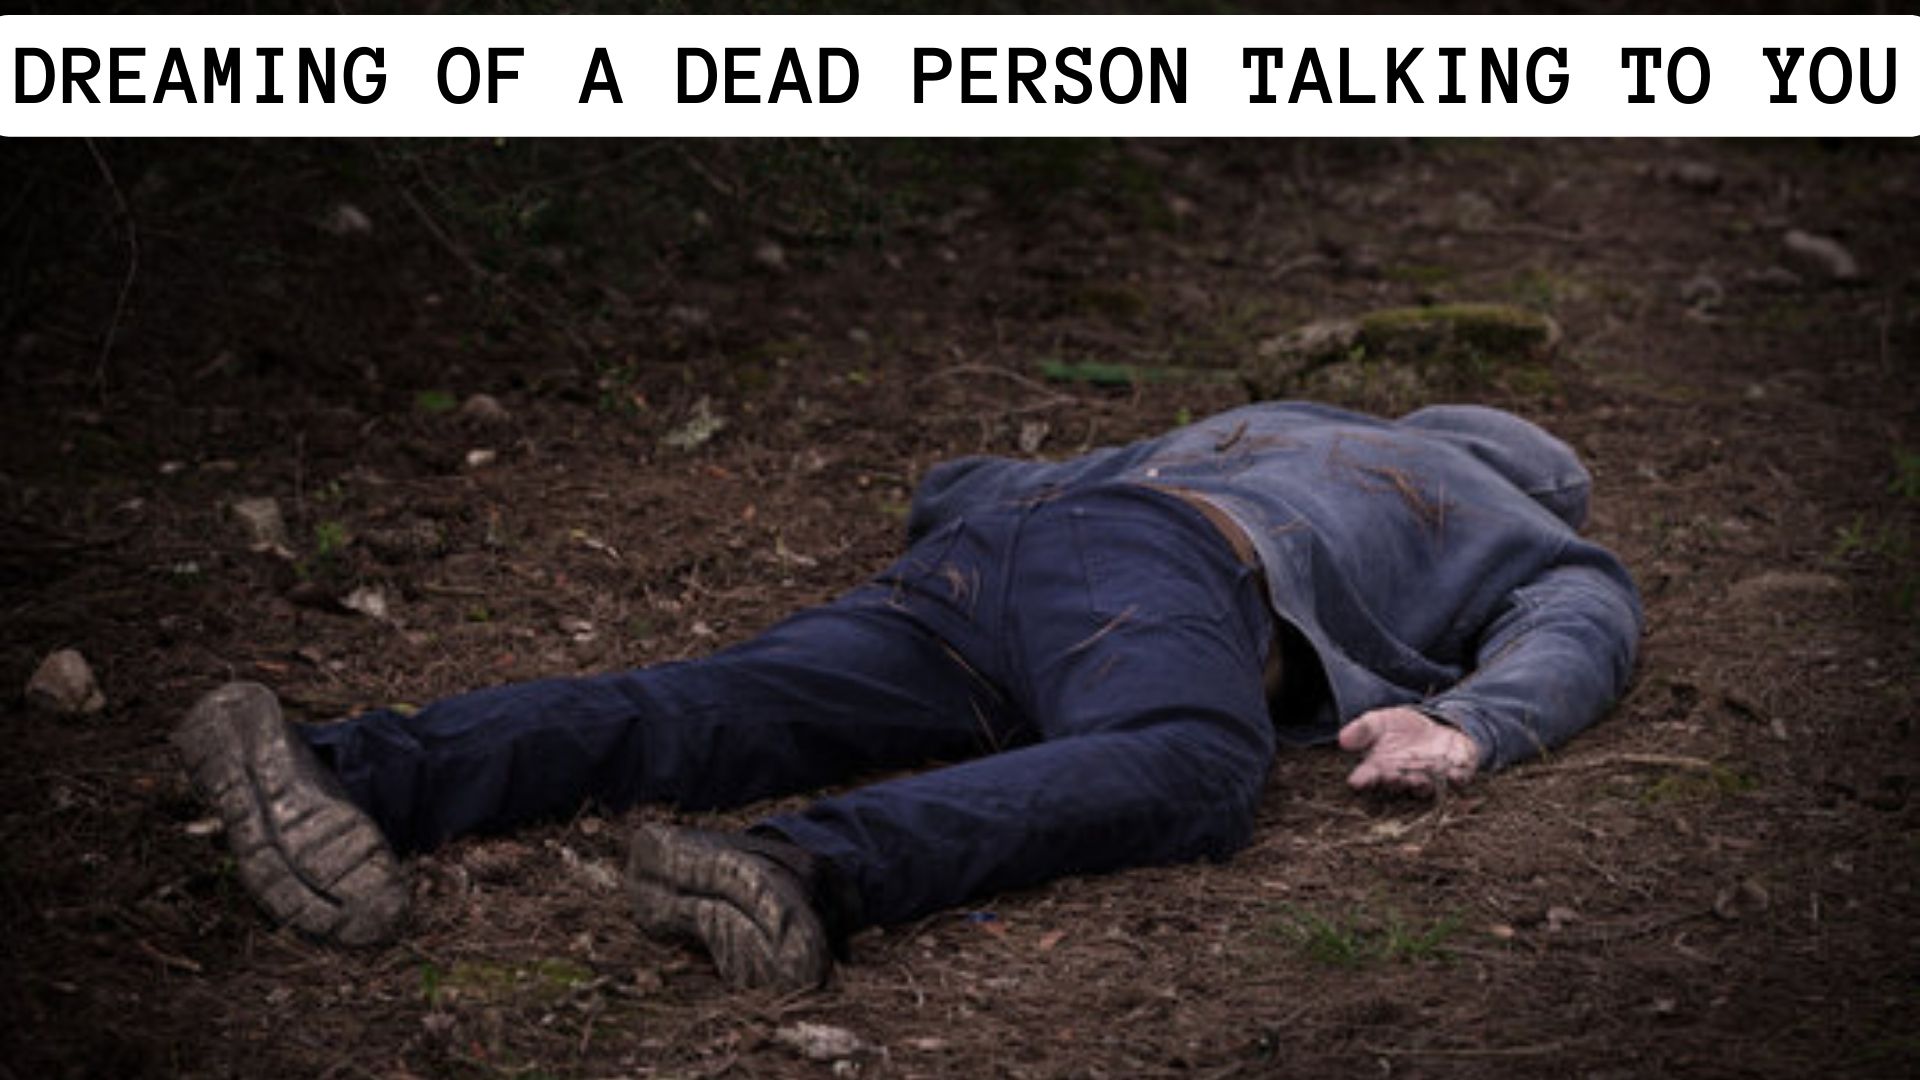 Dreaming Of A Dead Person Talking To You - What Does It Mean?